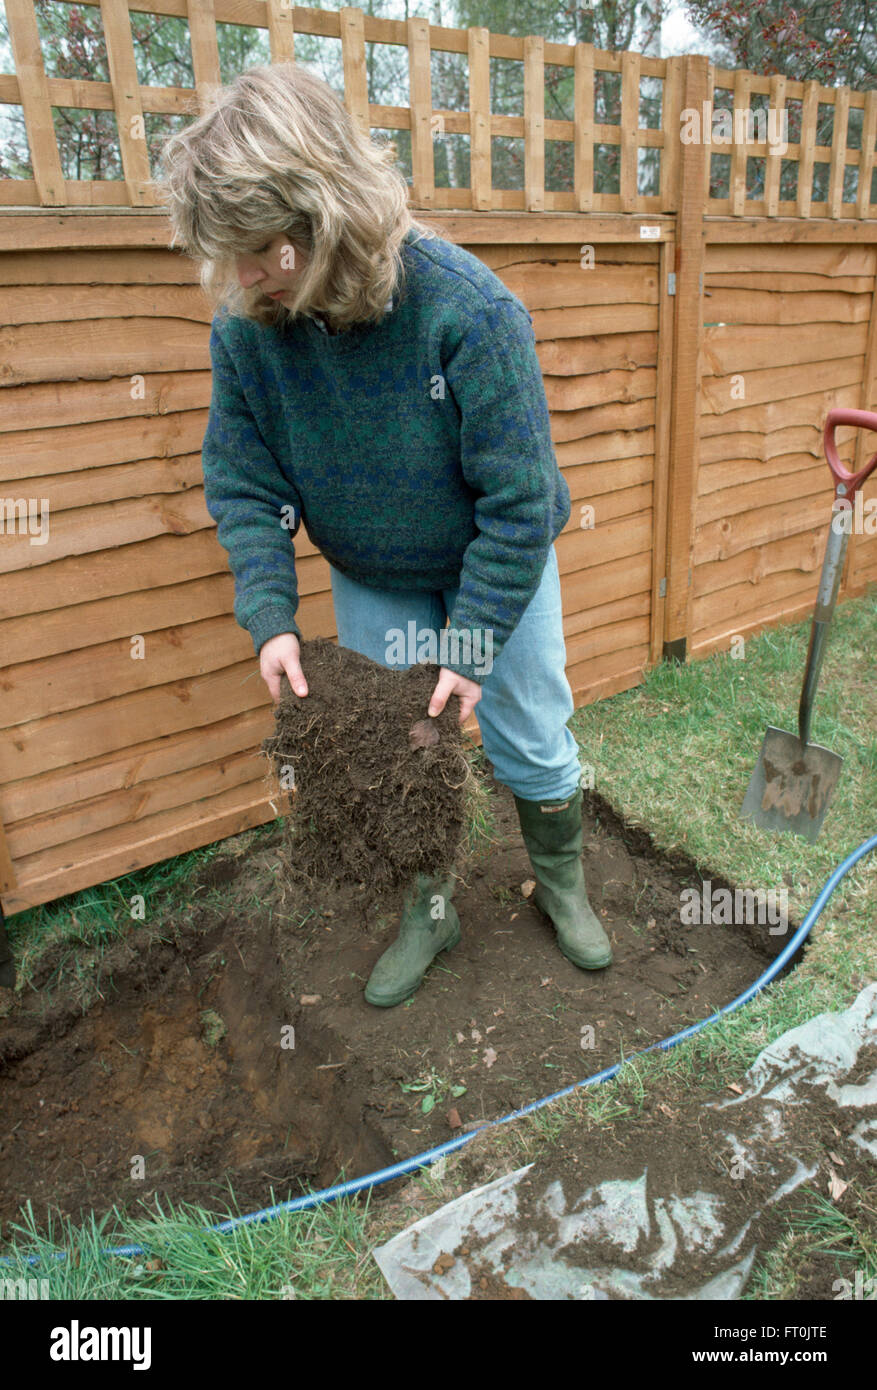 Woman removing turf from a lawn before making a new border     FOR EDITORIAL USE ONLY Stock Photo